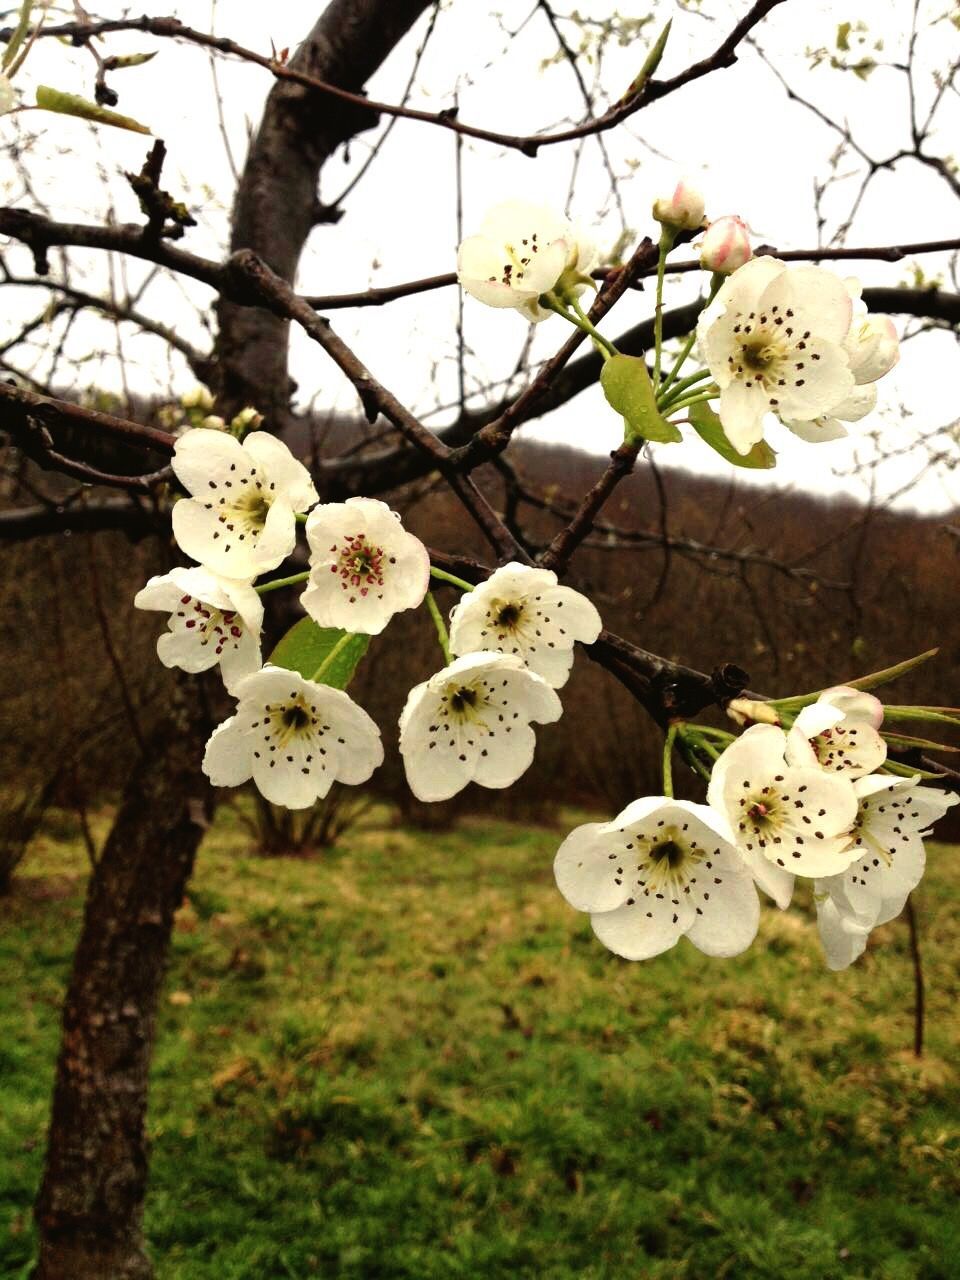 flower, white color, fragility, freshness, petal, growth, tree, flower head, beauty in nature, nature, blooming, close-up, blossom, branch, plant, in bloom, white, cherry blossom, focus on foreground, day